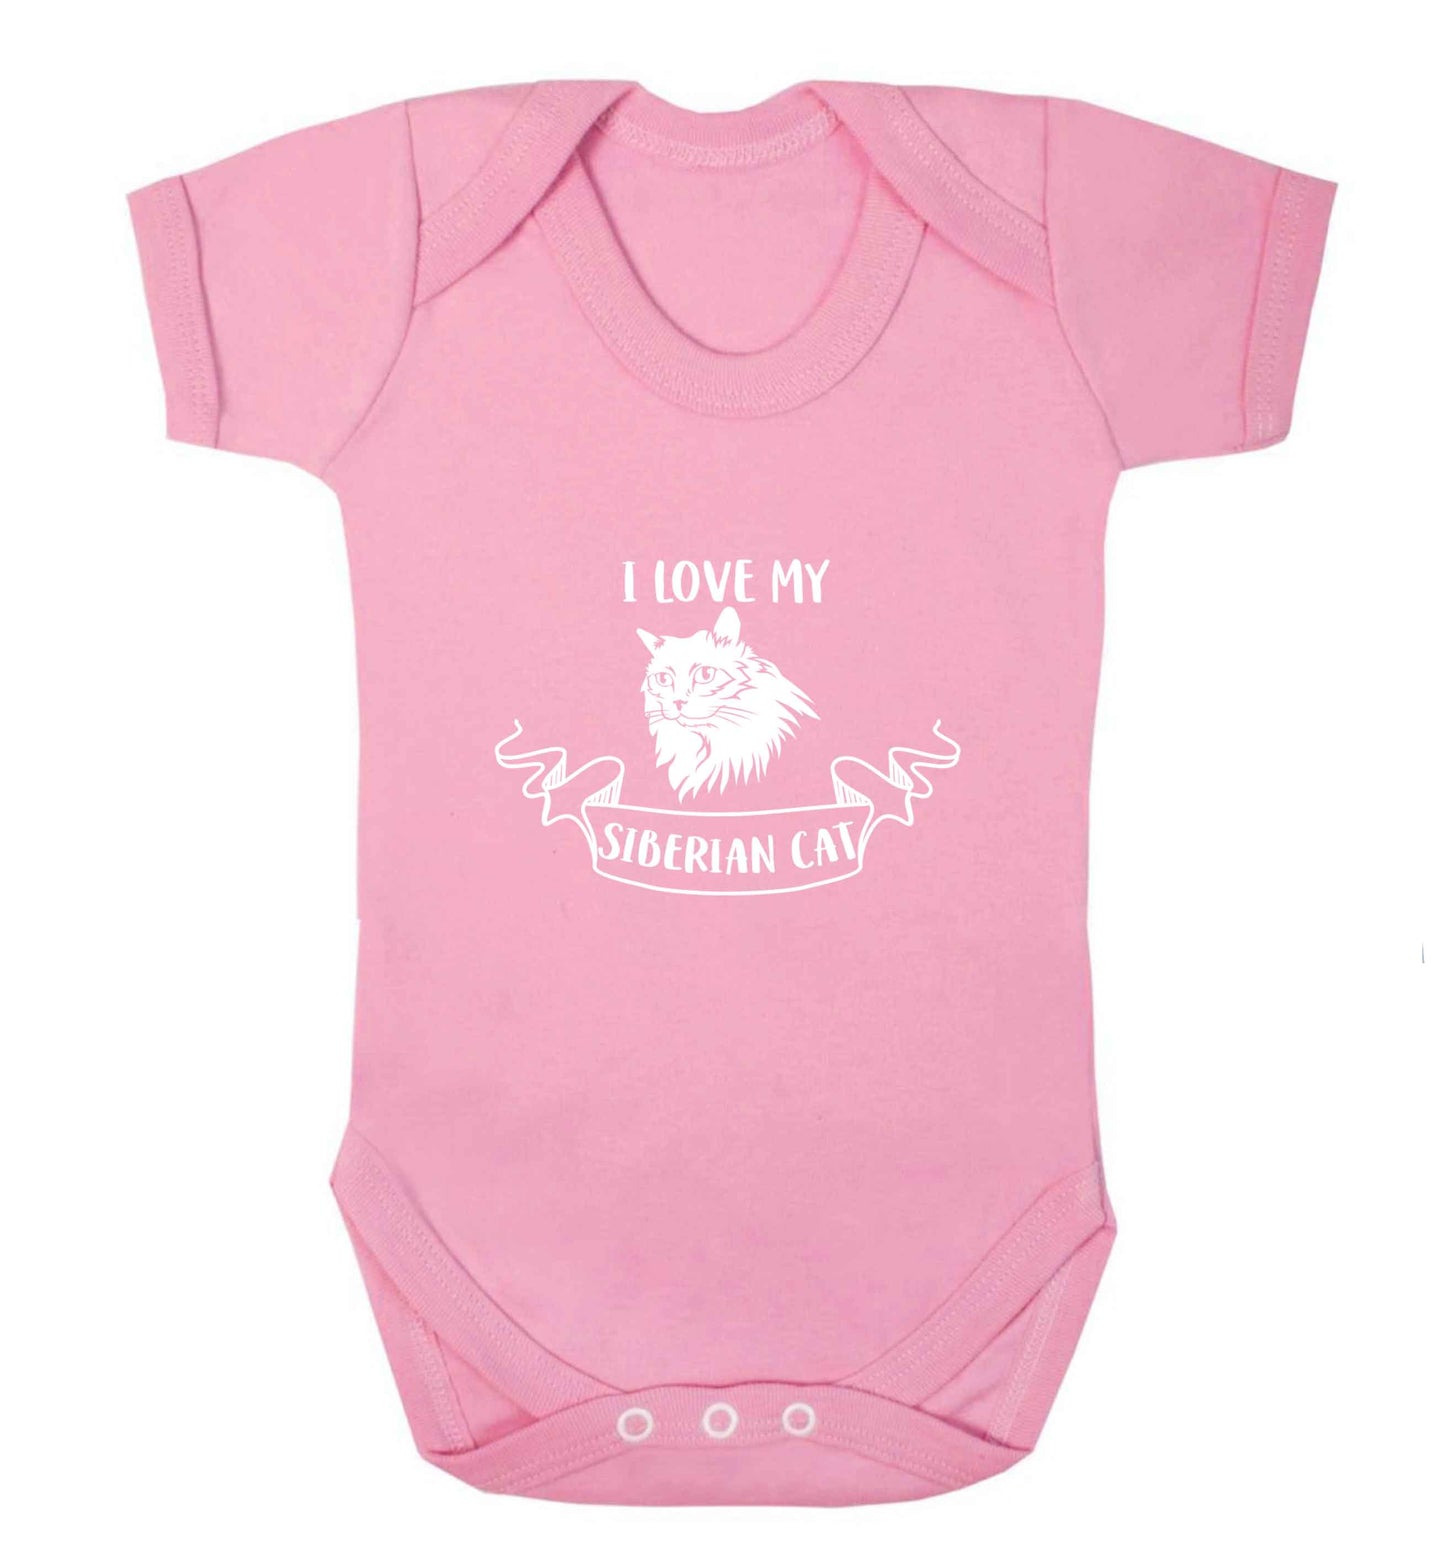 I love my siberian cat baby vest pale pink 18-24 months